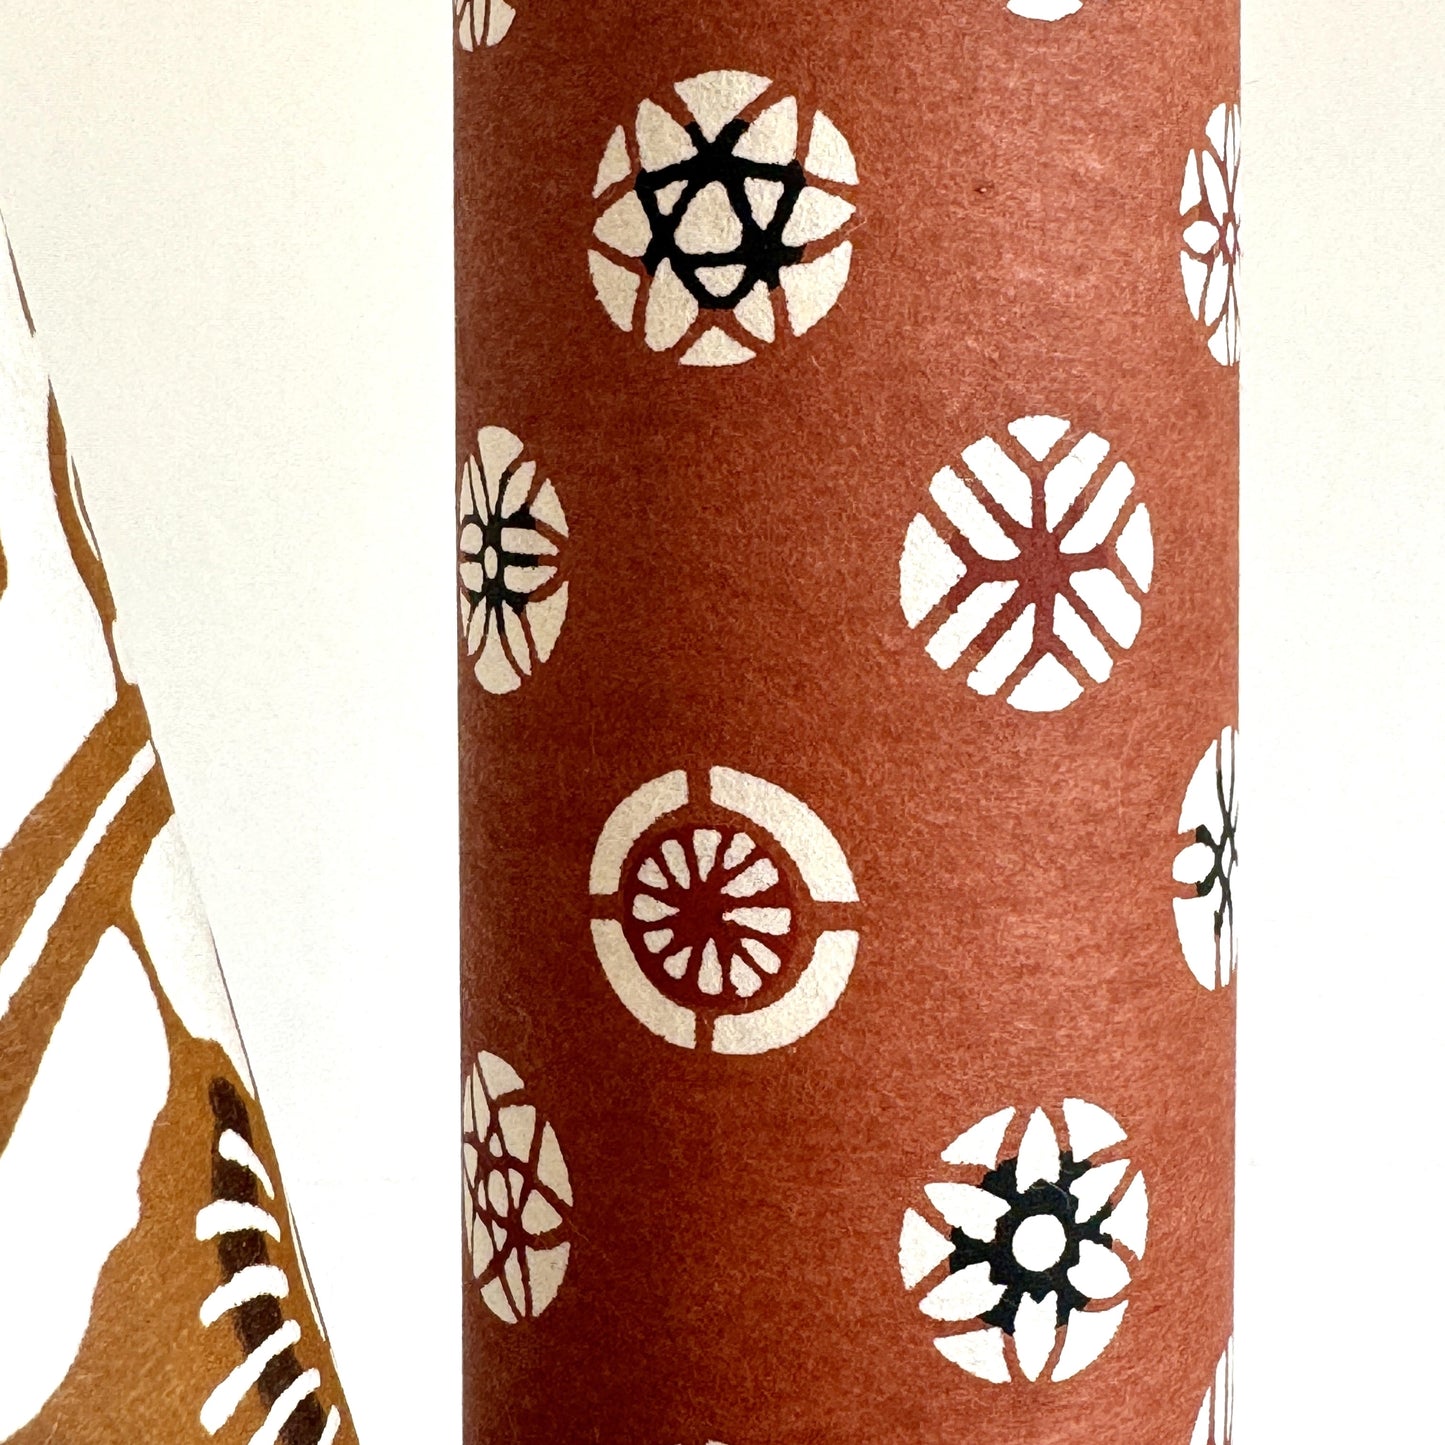 A Japanese stencil-dyed patterned paper with a repeat pattern of floral motif circles on a rich tan brown base. Close-up